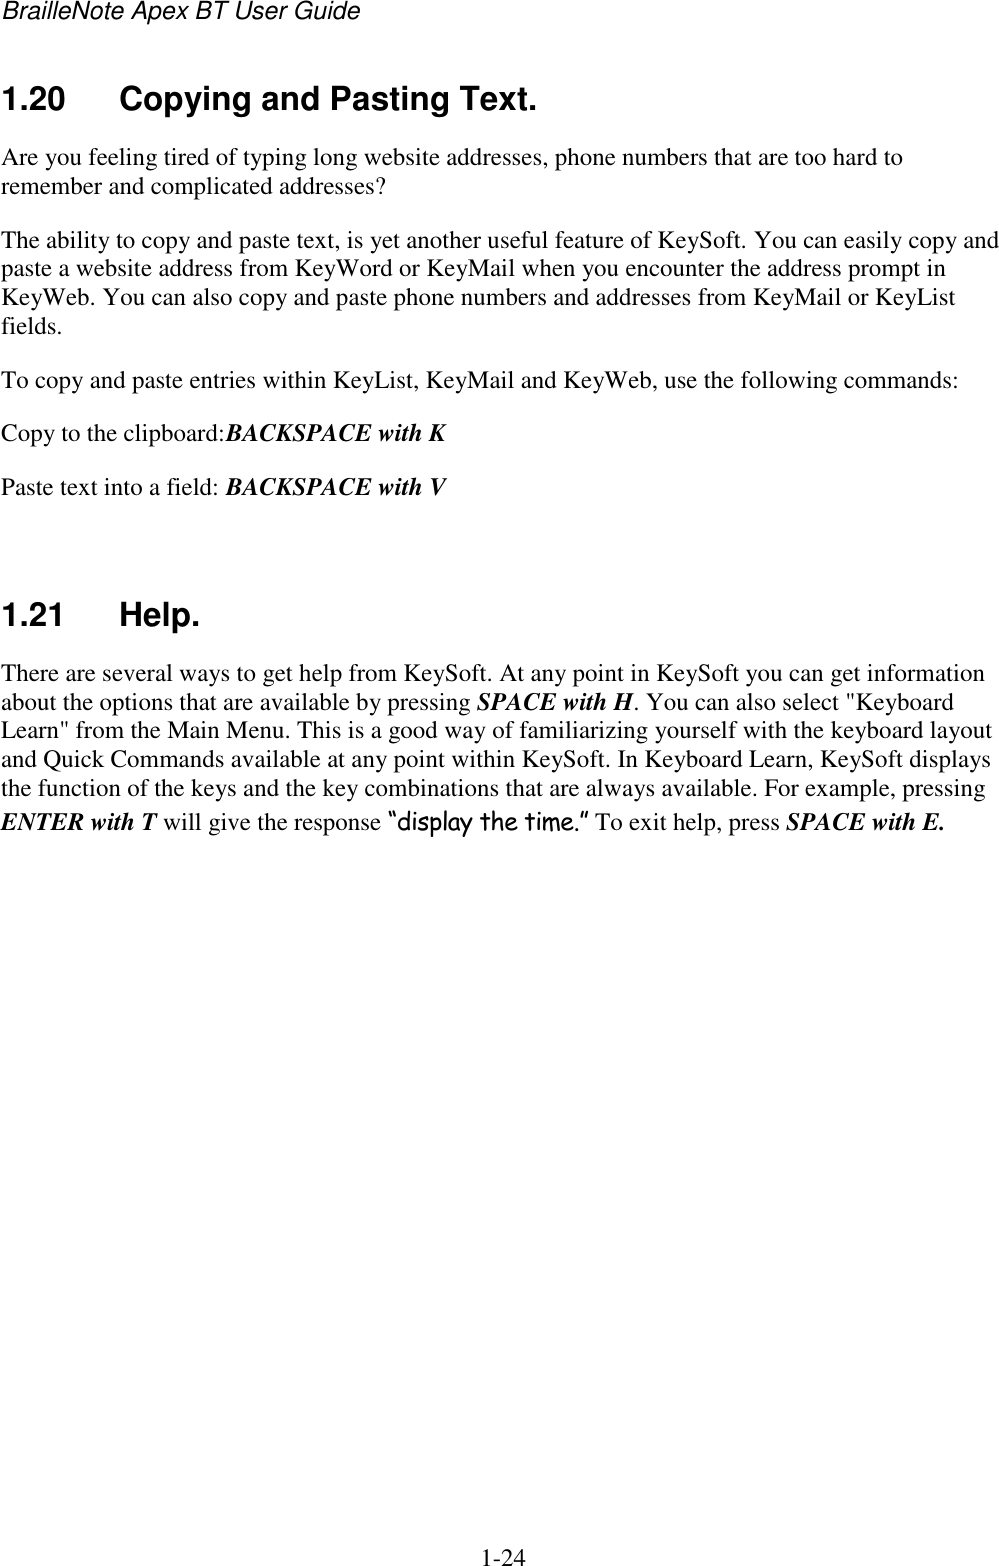 BrailleNote Apex BT User Guide   1-24   1.20  Copying and Pasting Text. Are you feeling tired of typing long website addresses, phone numbers that are too hard to remember and complicated addresses?  The ability to copy and paste text, is yet another useful feature of KeySoft. You can easily copy and paste a website address from KeyWord or KeyMail when you encounter the address prompt in KeyWeb. You can also copy and paste phone numbers and addresses from KeyMail or KeyList fields. To copy and paste entries within KeyList, KeyMail and KeyWeb, use the following commands: Copy to the clipboard: BACKSPACE with K Paste text into a field: BACKSPACE with V   1.21  Help. There are several ways to get help from KeySoft. At any point in KeySoft you can get information about the options that are available by pressing SPACE with H. You can also select &quot;Keyboard Learn&quot; from the Main Menu. This is a good way of familiarizing yourself with the keyboard layout and Quick Commands available at any point within KeySoft. In Keyboard Learn, KeySoft displays the function of the keys and the key combinations that are always available. For example, pressing ENTER with T will give the response “display the time.” To exit help, press SPACE with E.   